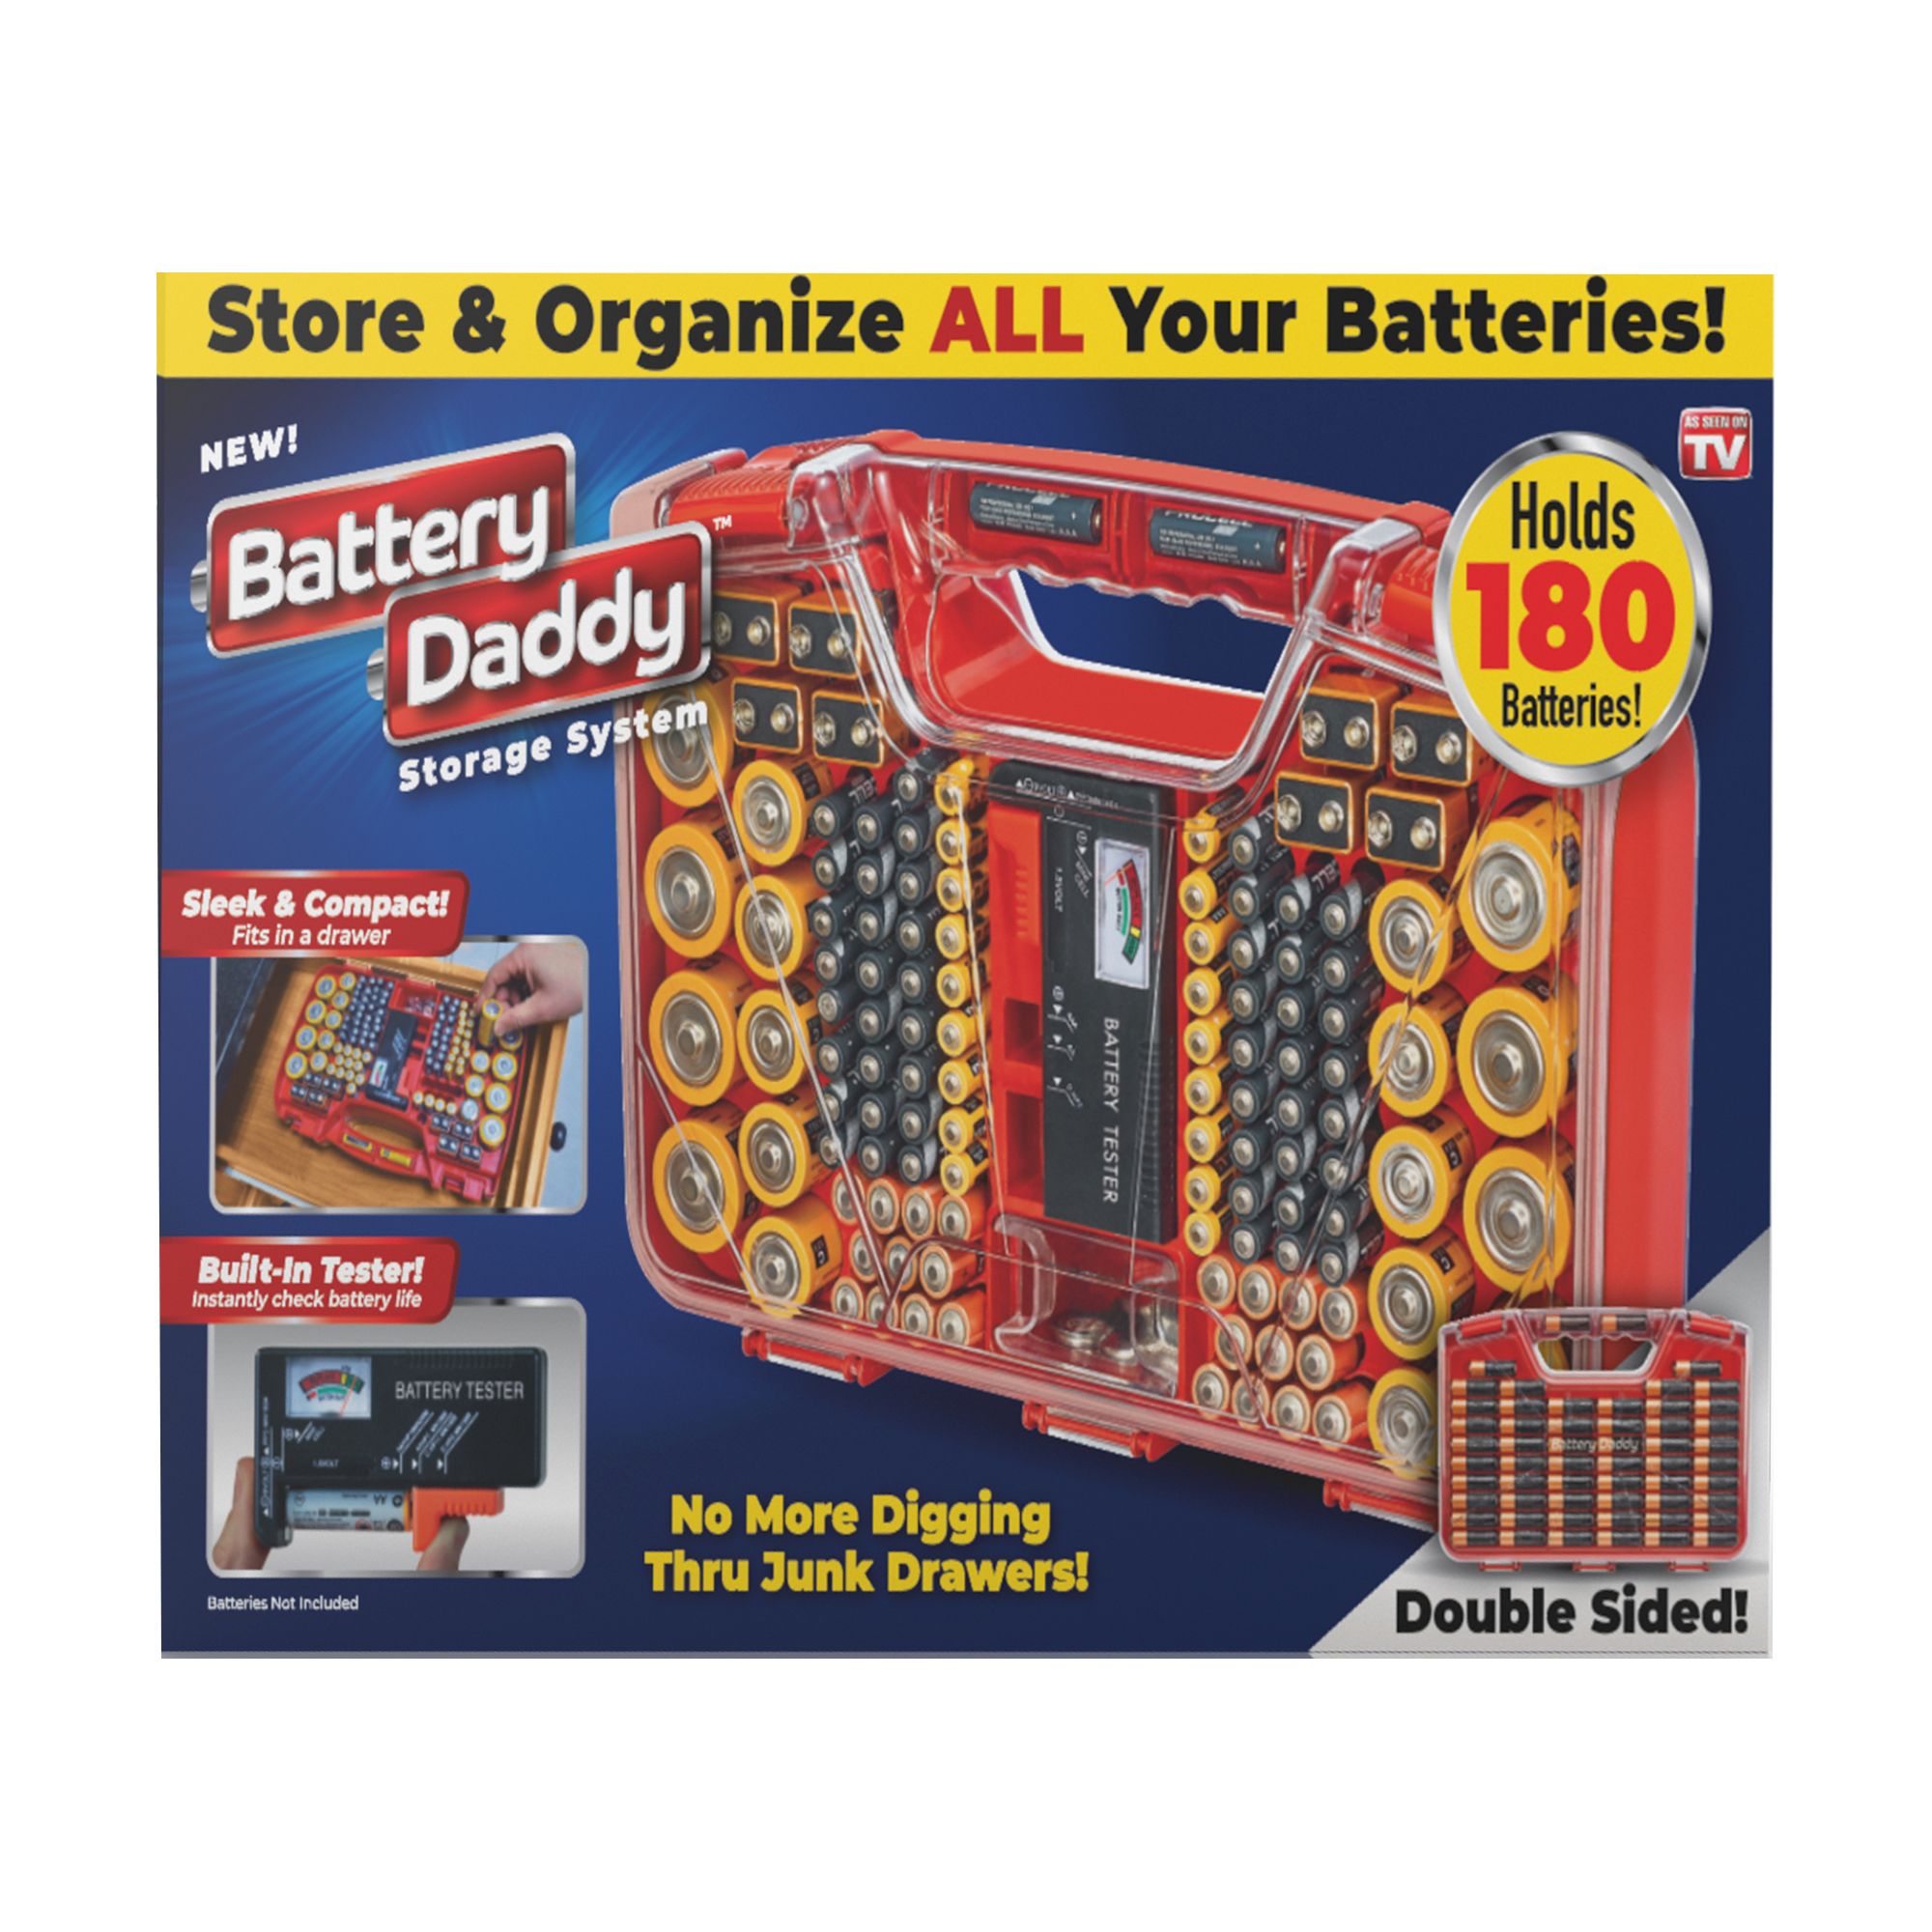 Battery Daddy, Battery Storage System - Sootch00 Review - GetZone